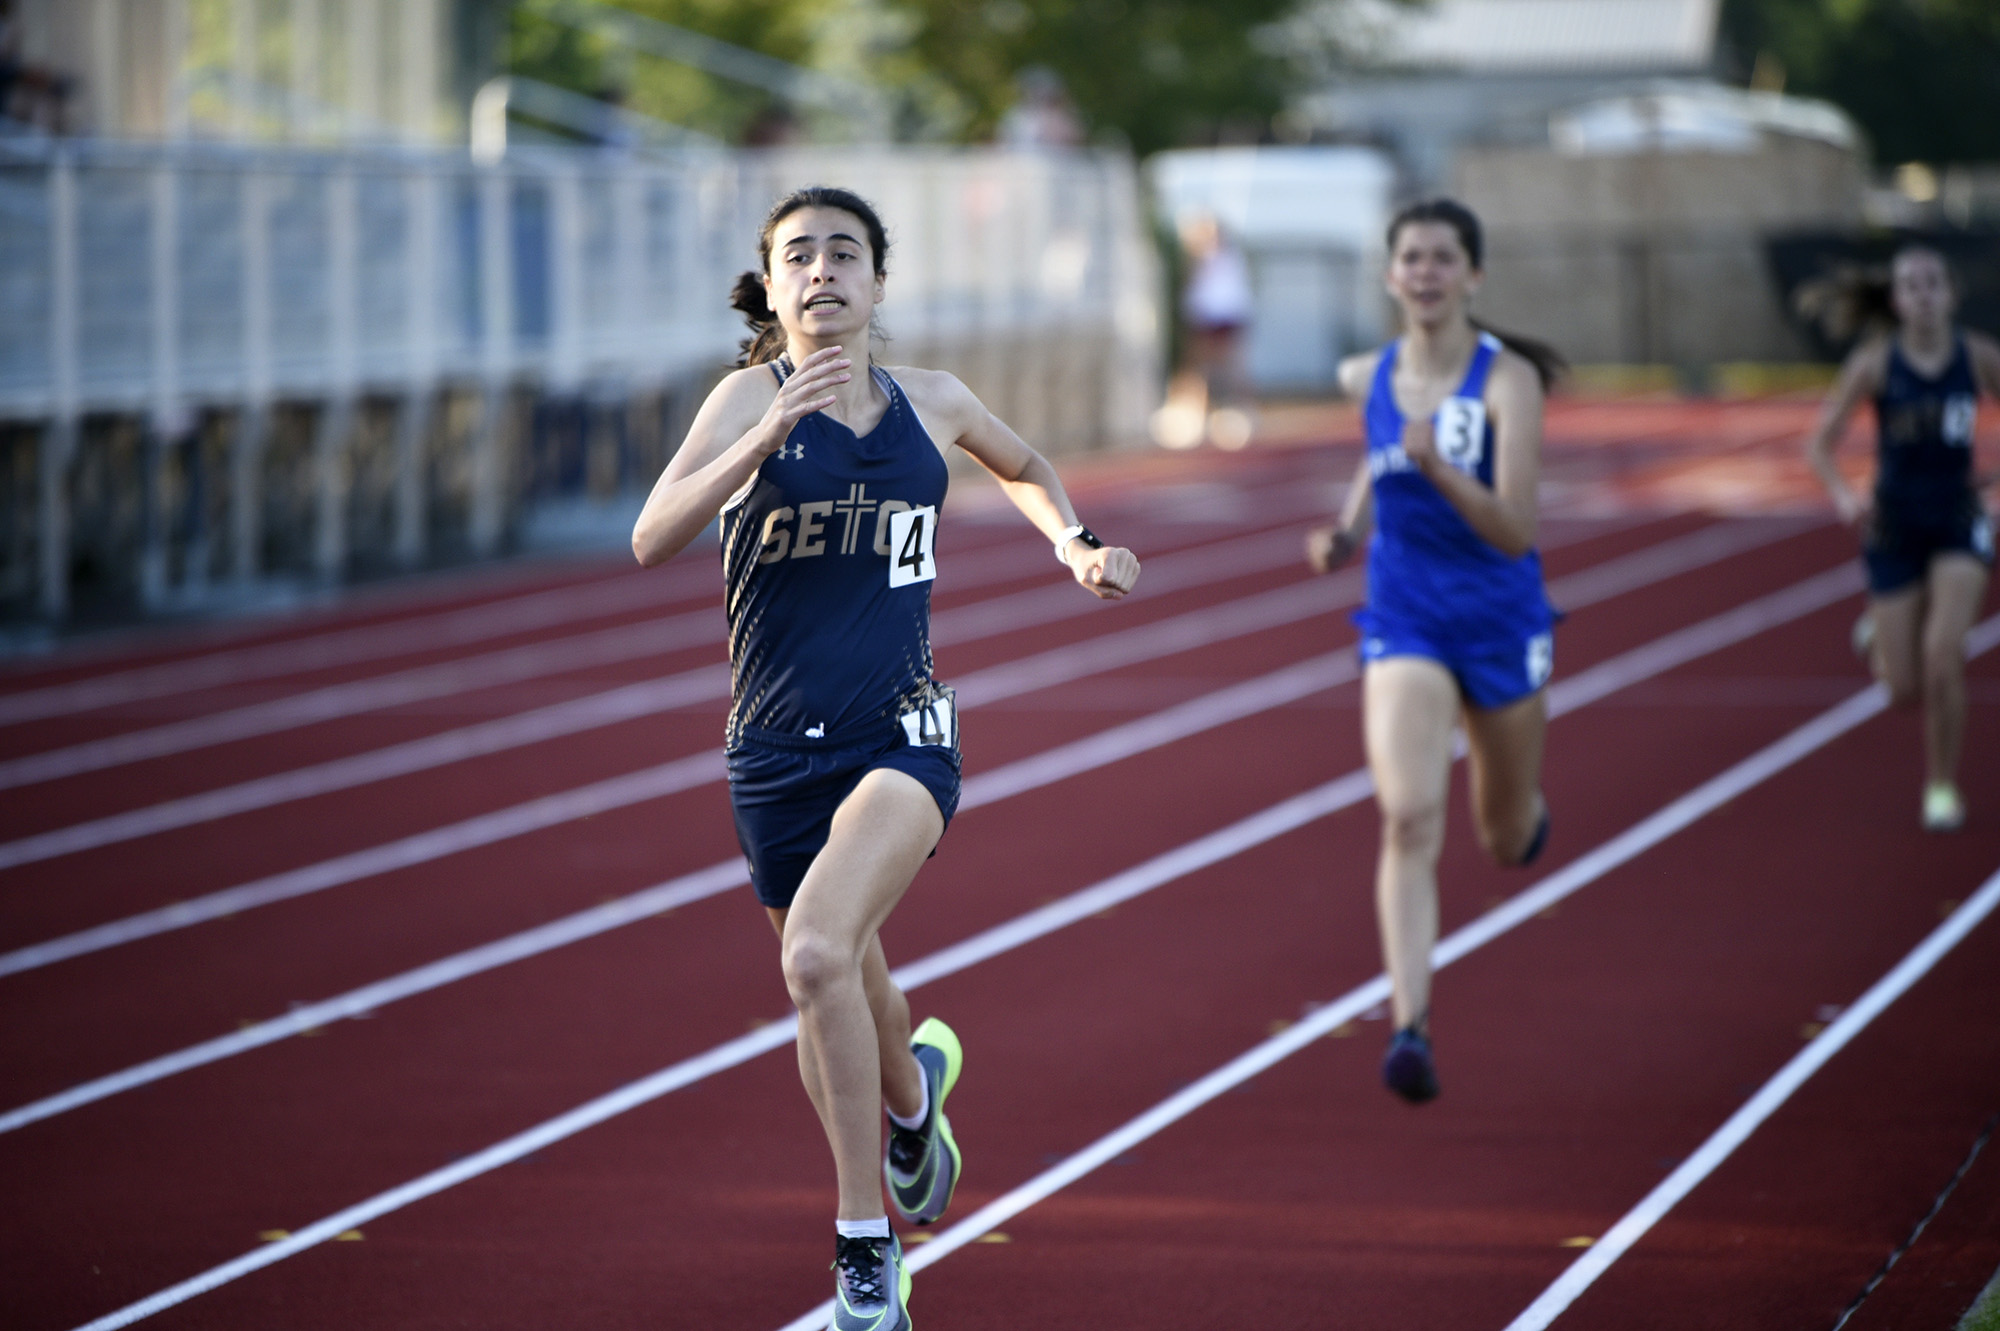 Seton Catholic's Alexis Leone sprints to the finish of the girls 800 meters to post her third win at the Class 1A District 4 track and field meet at Seton Catholic on Thursday, May 18, 2023.